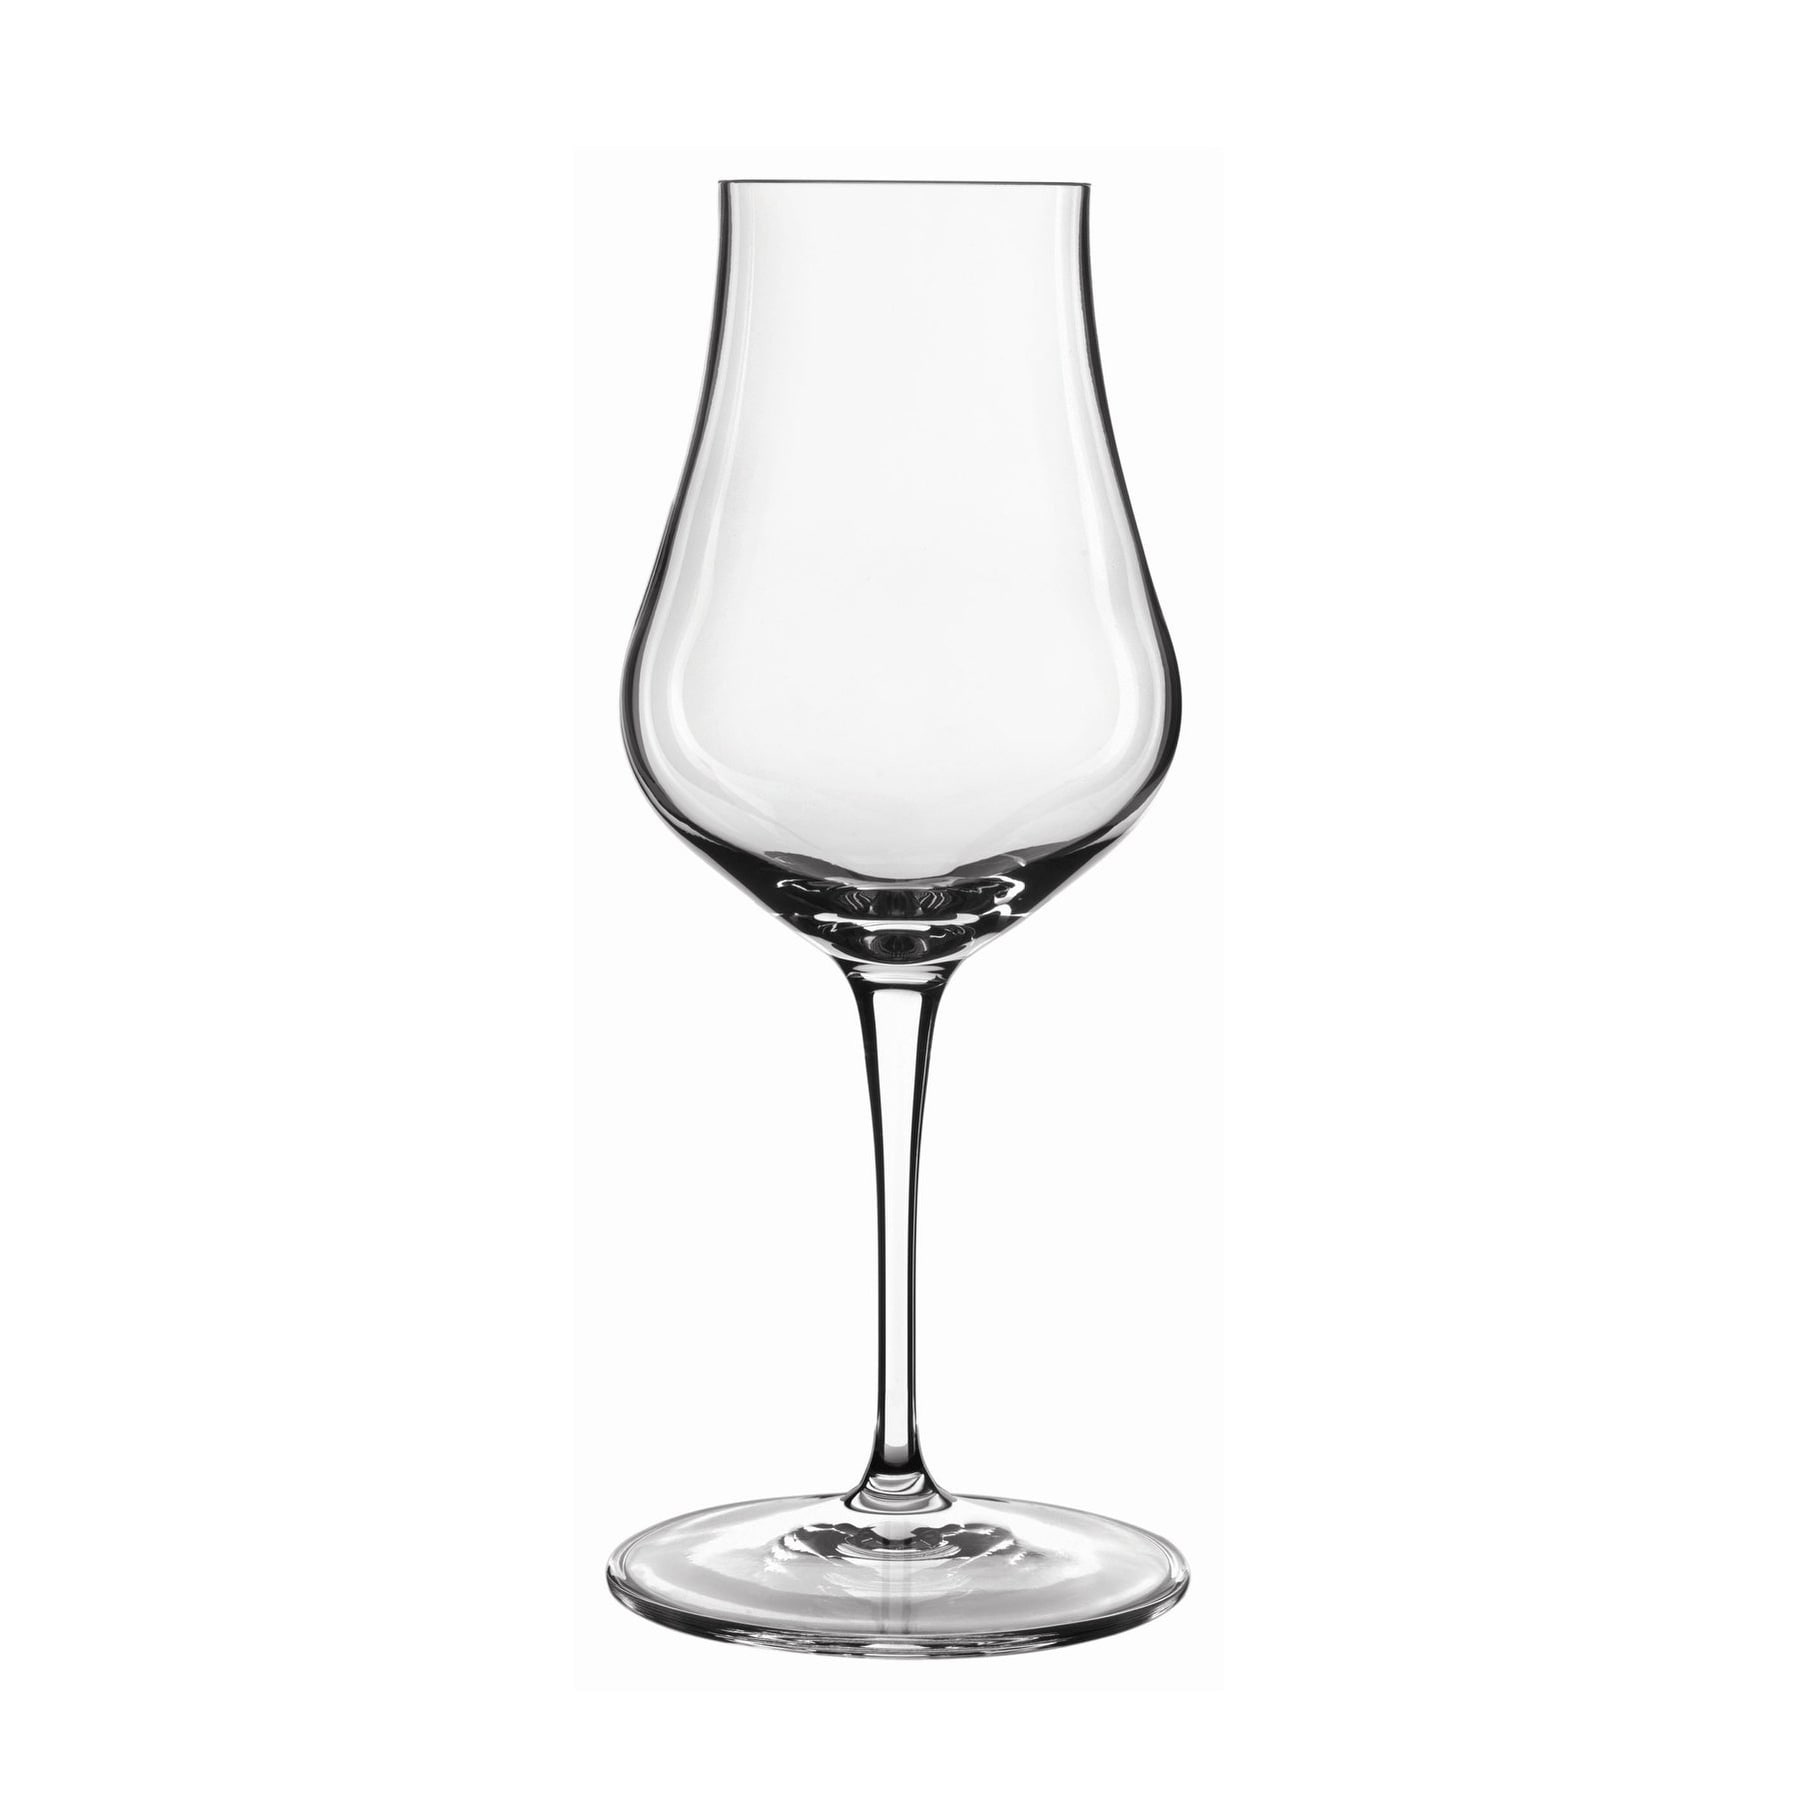 https://ak1.ostkcdn.com/images/products/is/images/direct/b70ea5ff6af5cd707bd6018d4e90e30d7a7c2ac6/Luigi-Bormioli-Vinoteque-Snifter-Liqueur-Glass-Set-of-6.jpg